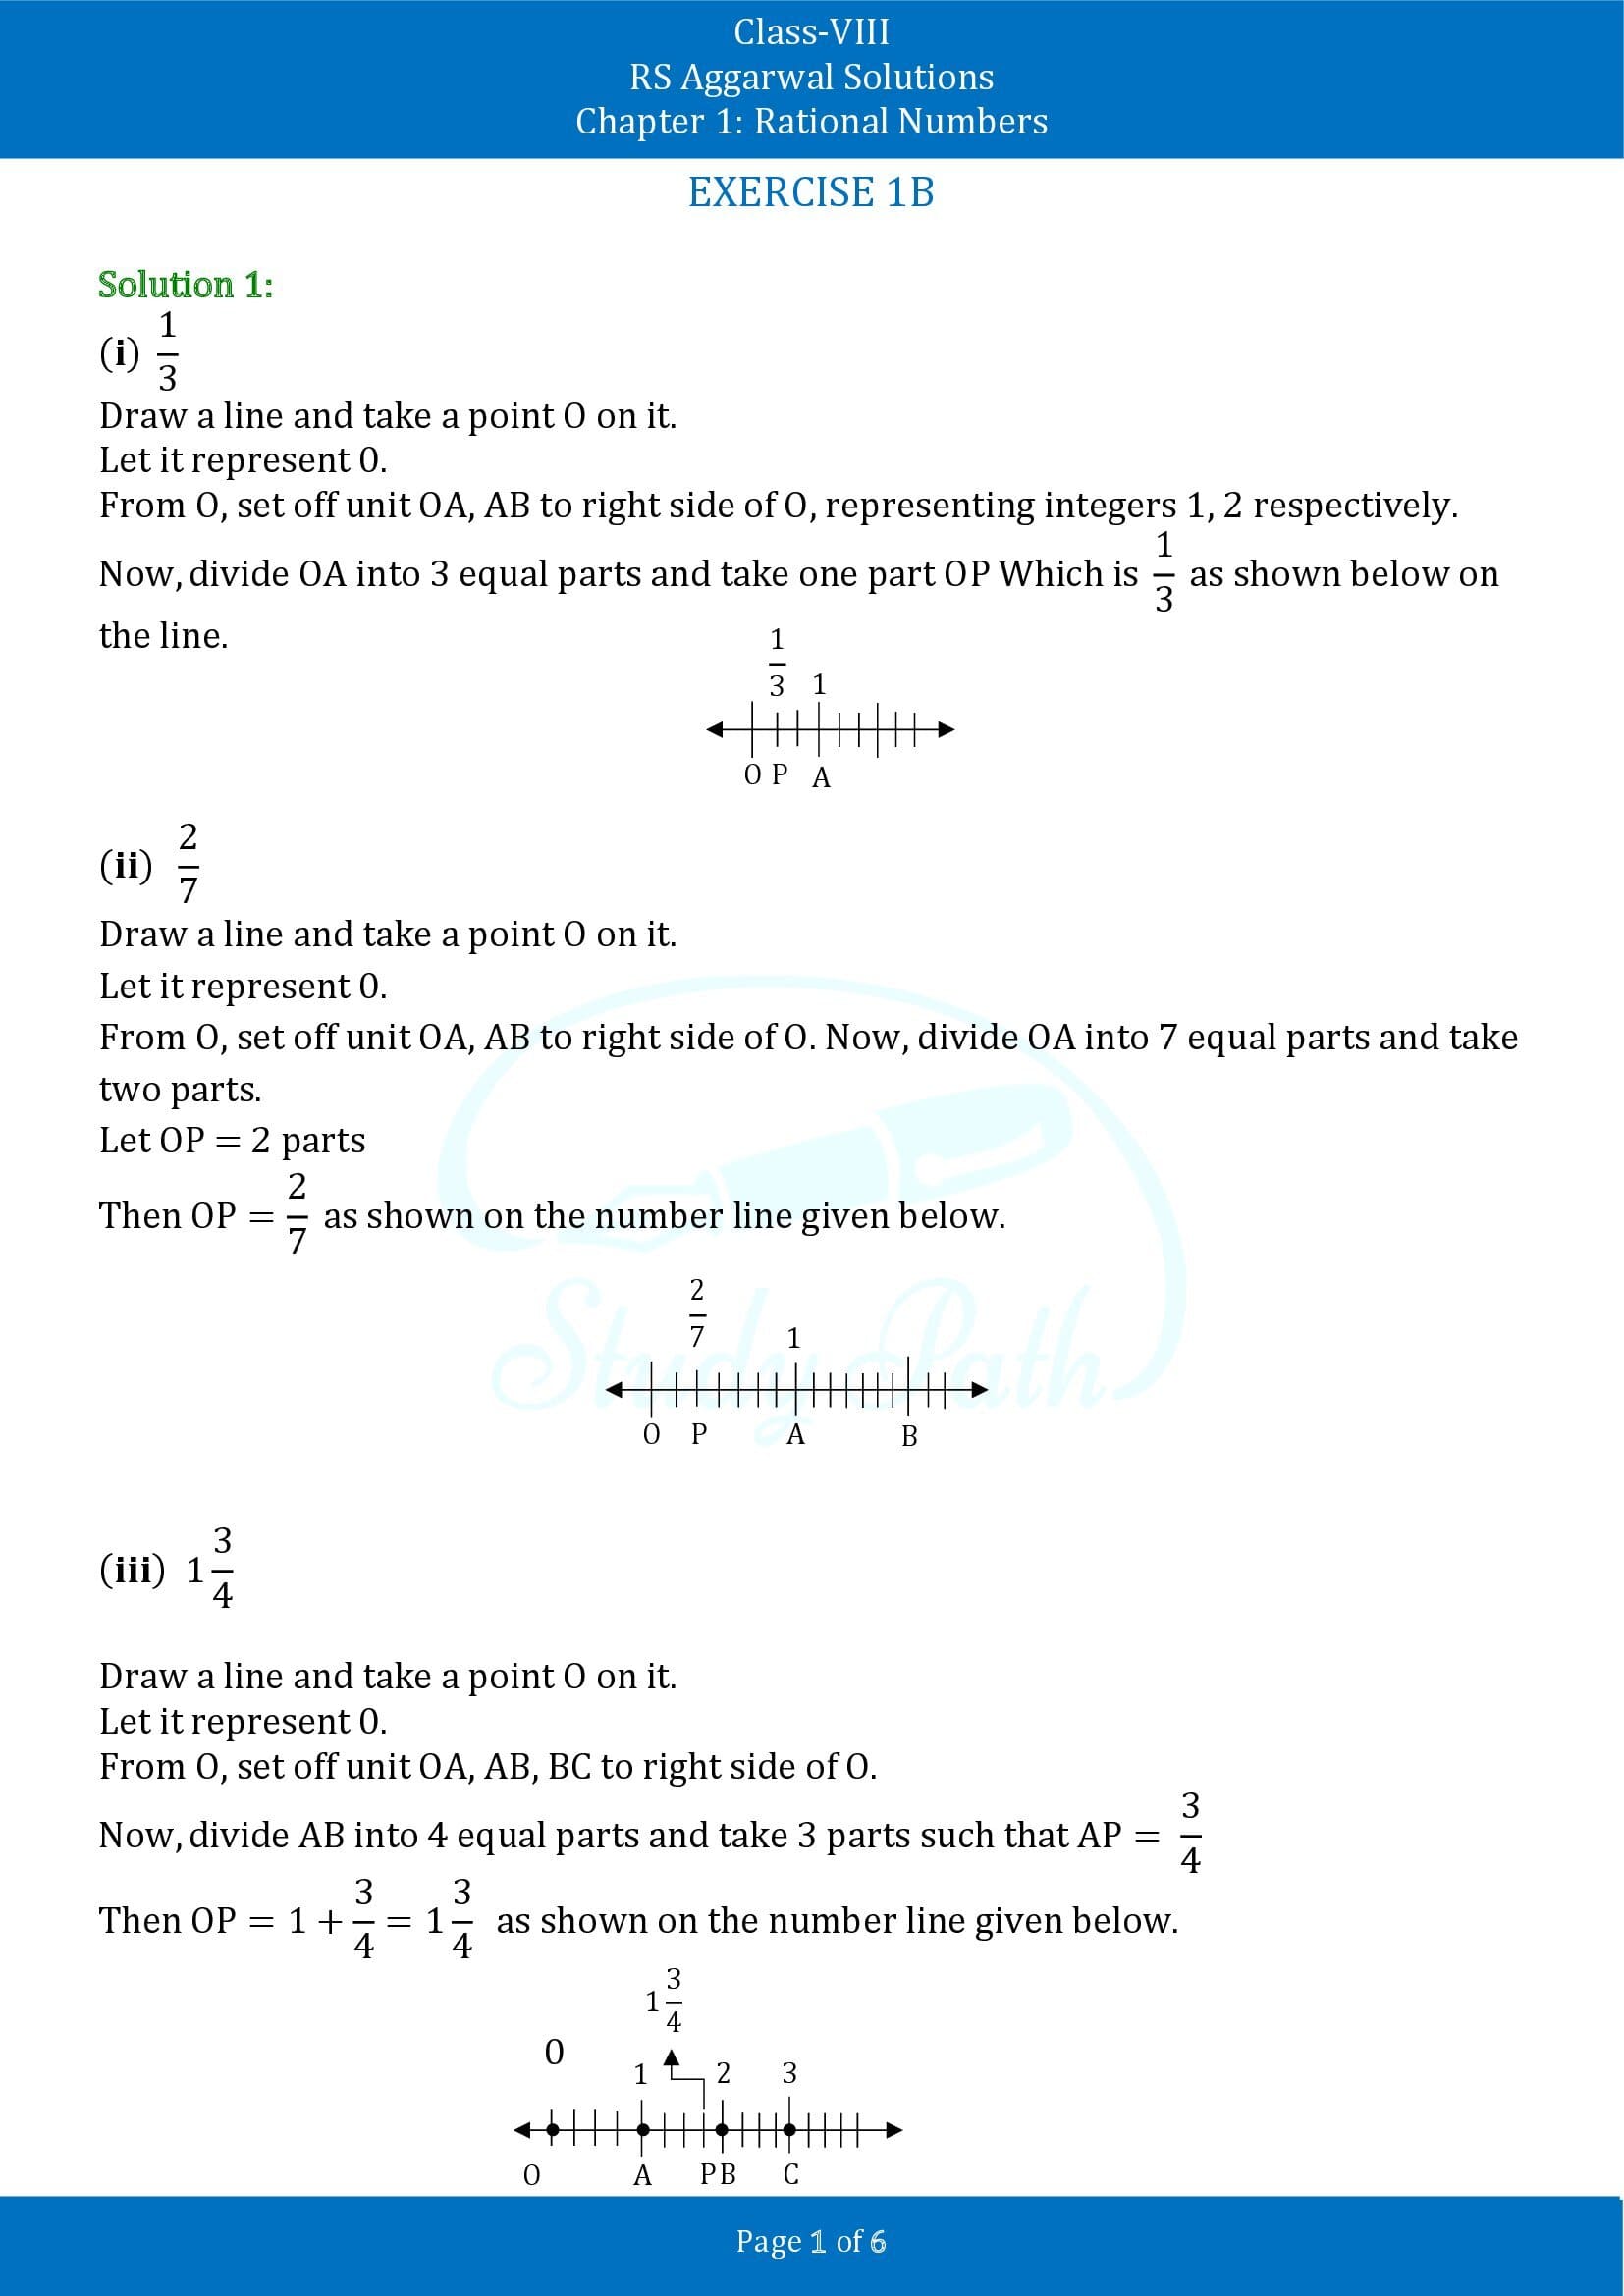 RS Aggarwal Solutions Class 8 Chapter 1 Rational Numbers Exercise 1B 00001